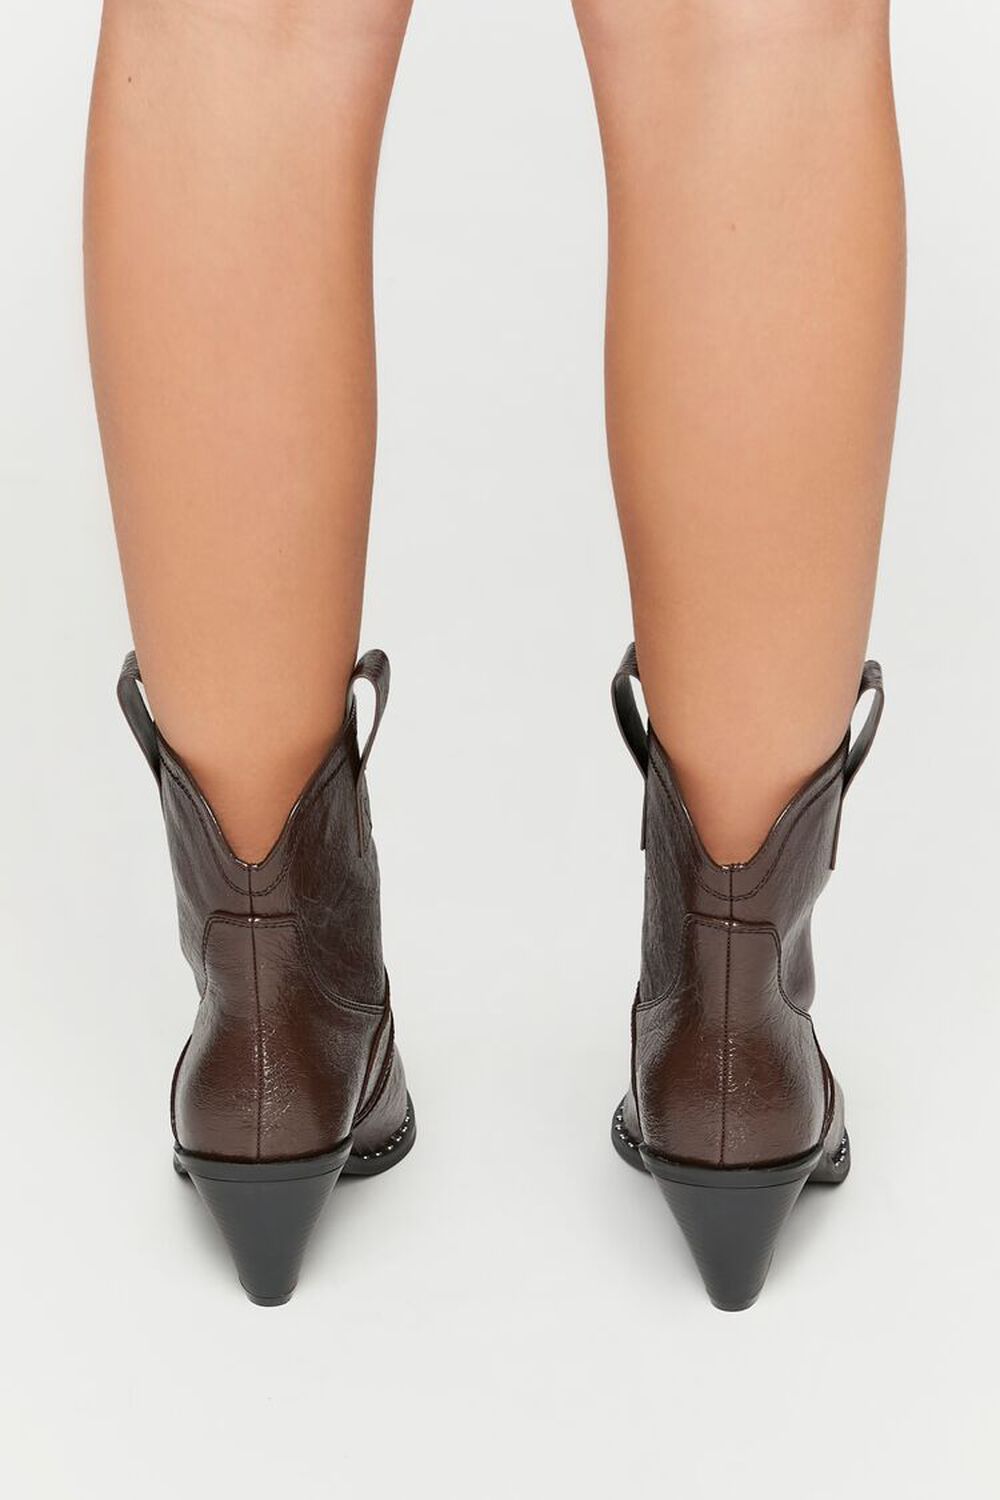 BROWN Faux Leather Cowboy Ankle Boots, image 3